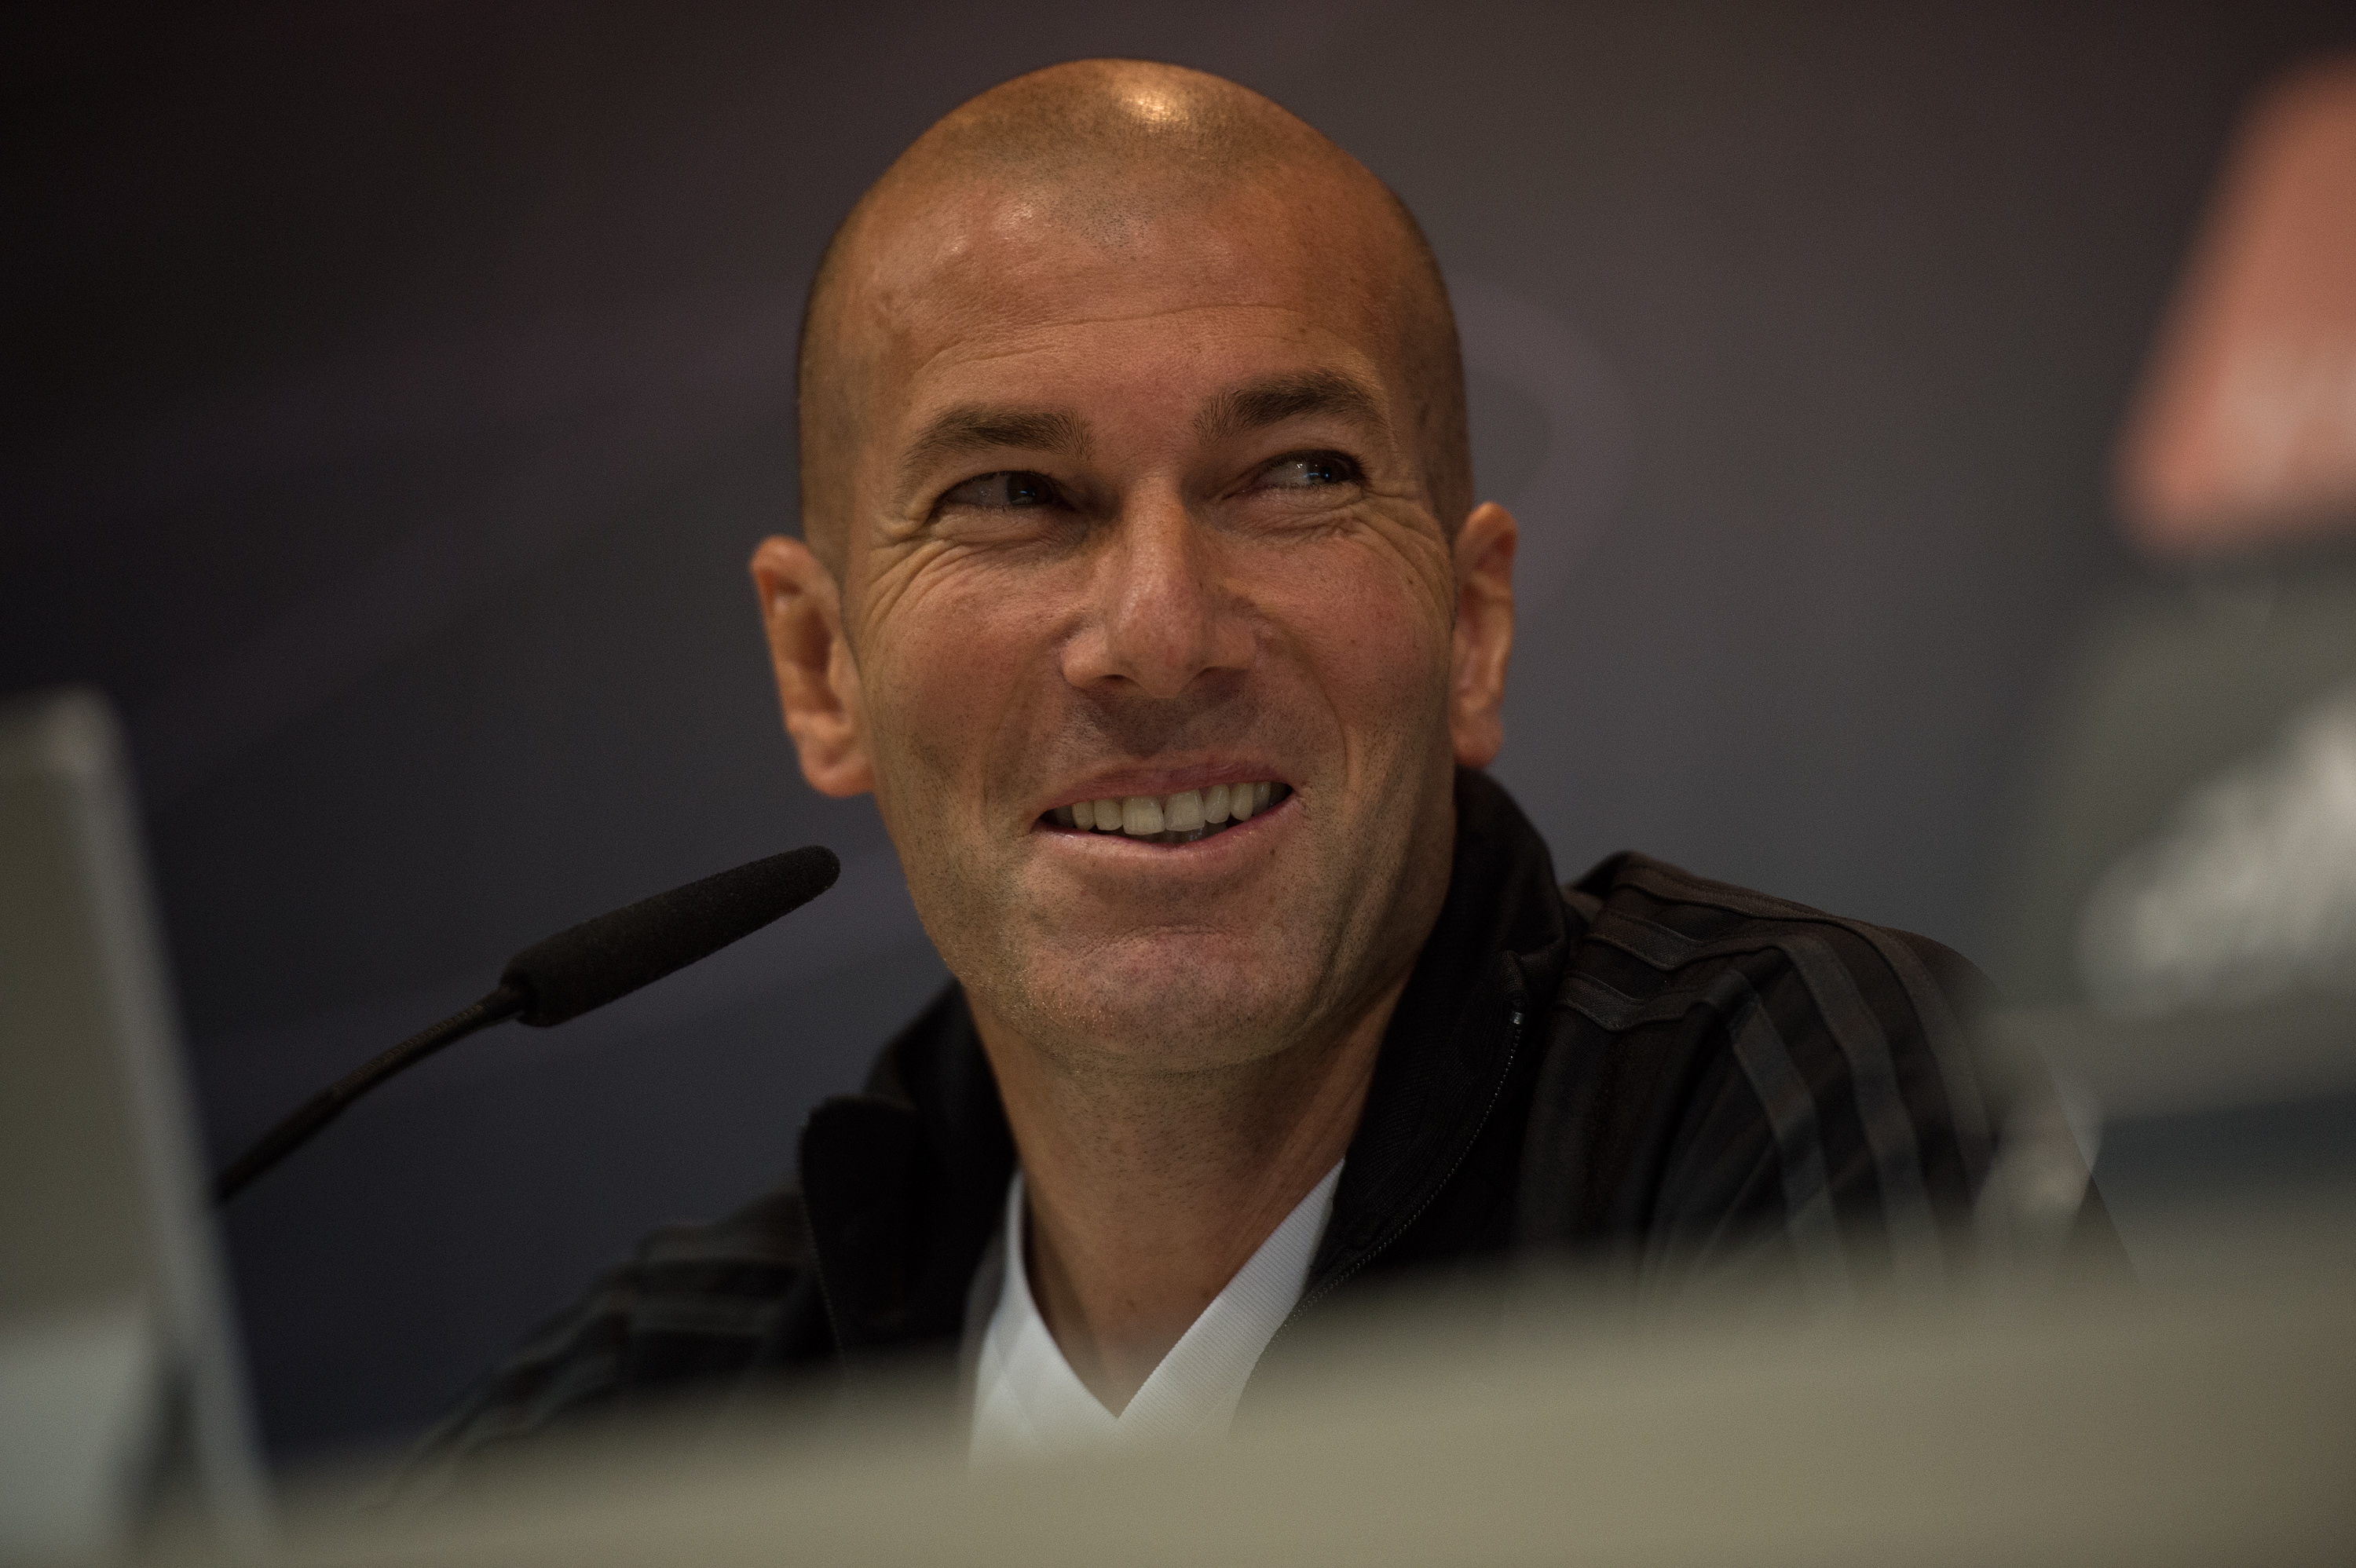 MADRID, SPAIN - DECEMBER 22:  Zinedine Zidane, Manager of Real Madrid smiles during the Real press conference at Valdebebas training ground on December 22, 2017 in Madrid, Spain. (Photo by Denis Doyle/Getty Images)